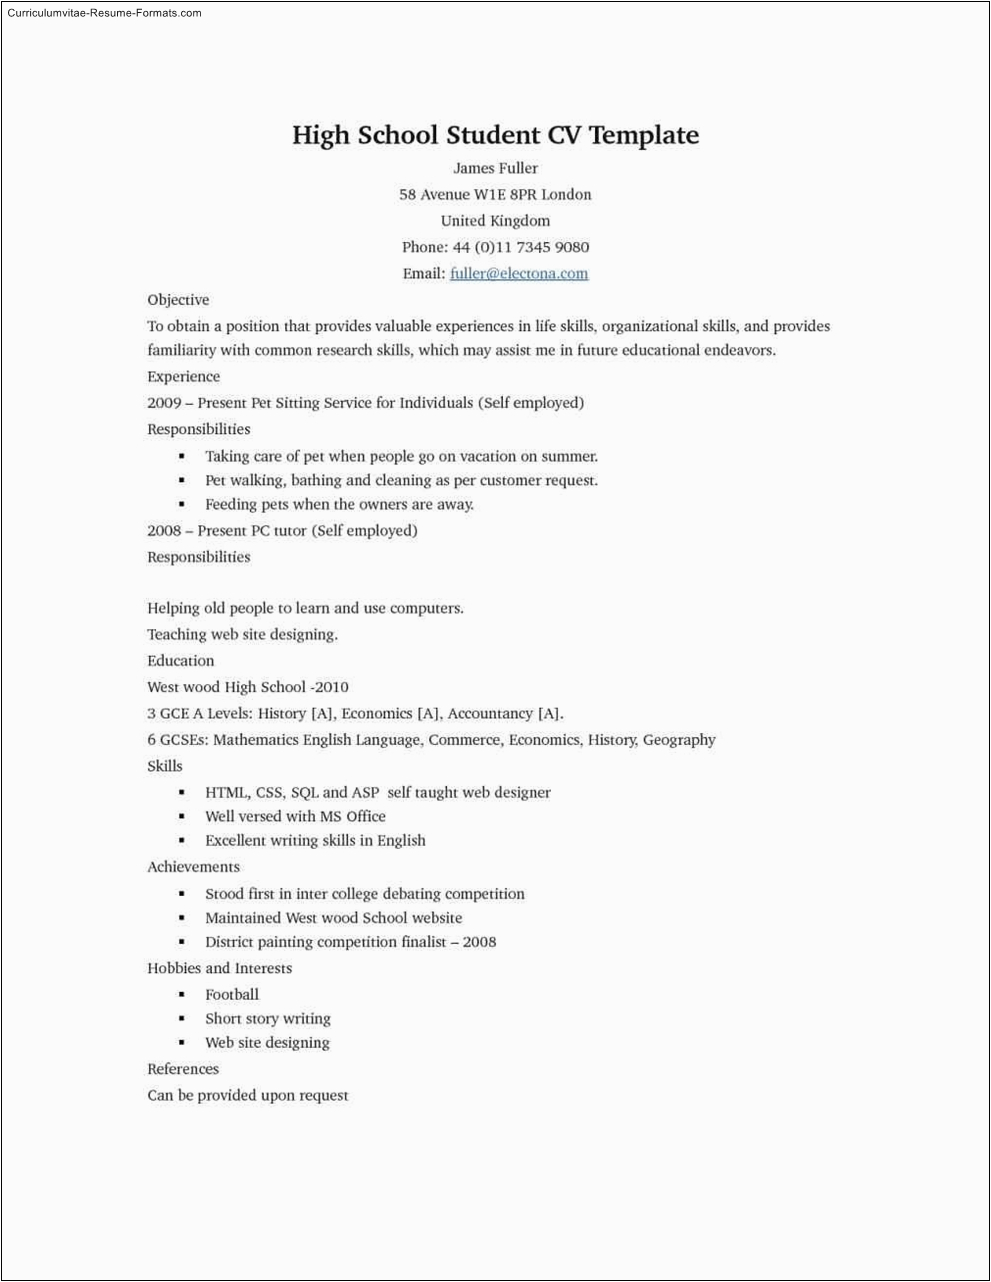 College Resume for High School Students Template High School Student Resume Template